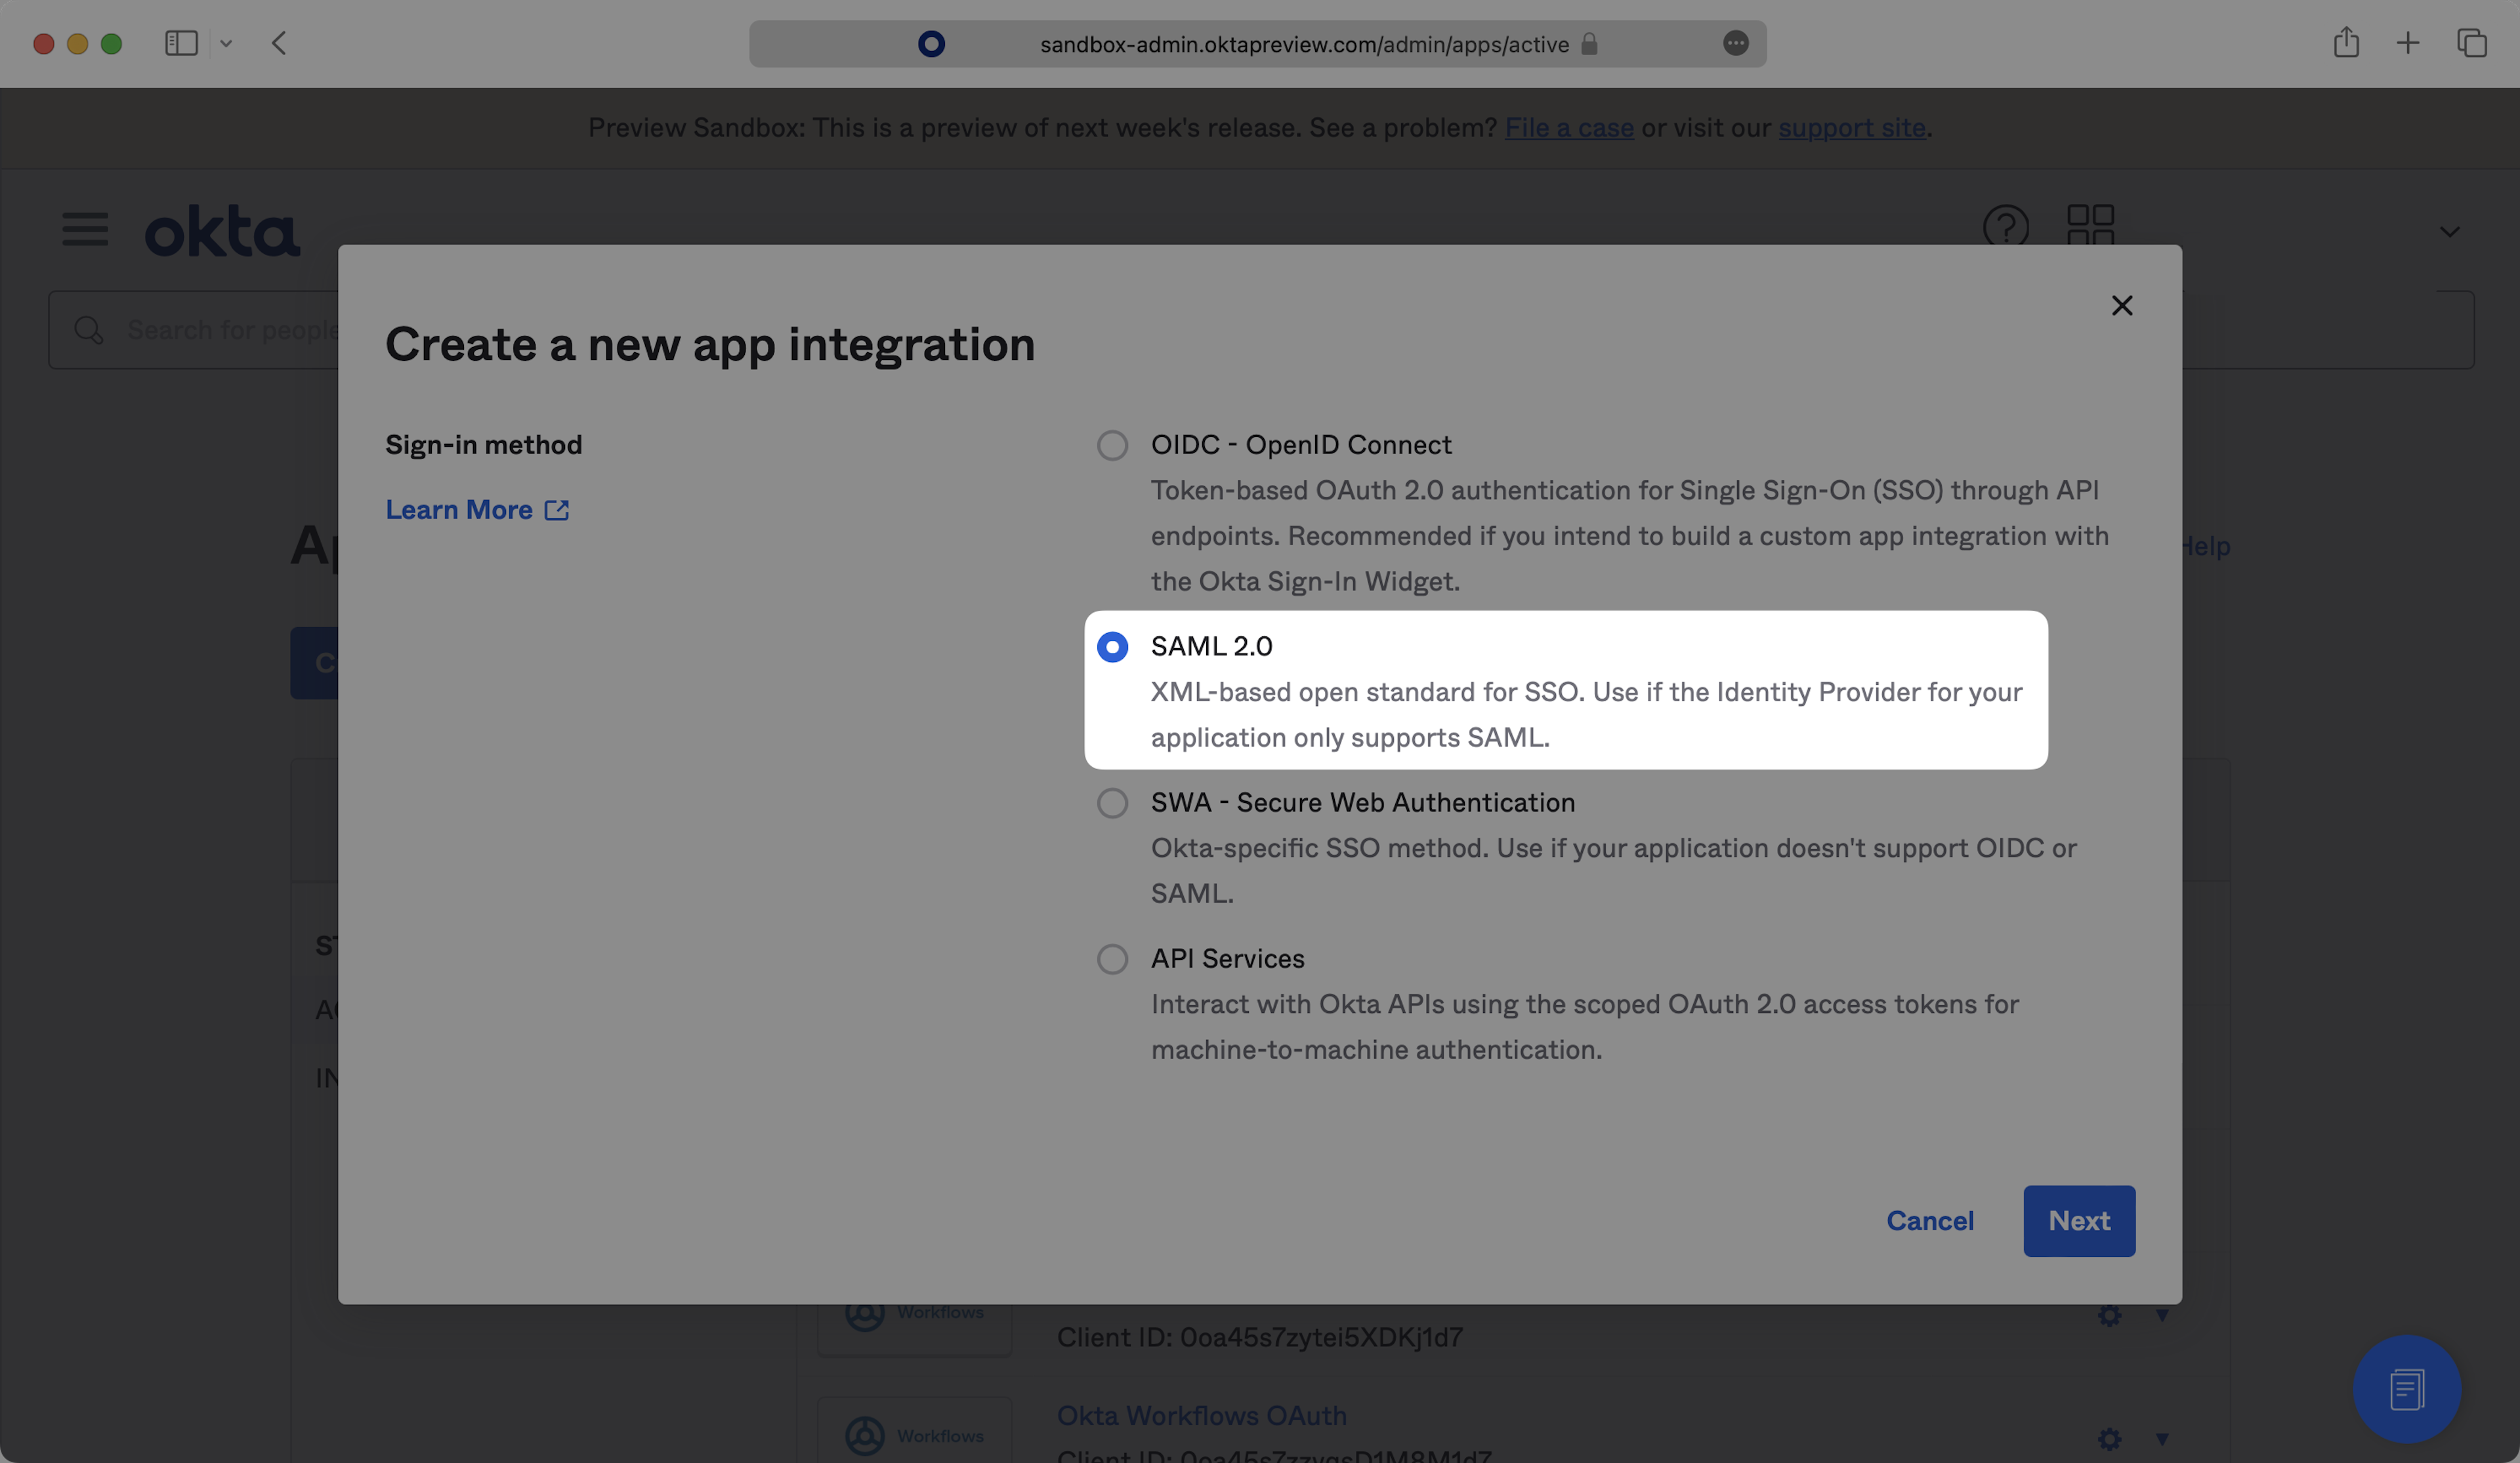 A screenshot showing where to select 'SAML 2.0' in the 'Create a new app integration' portal in the Okta dashboard.